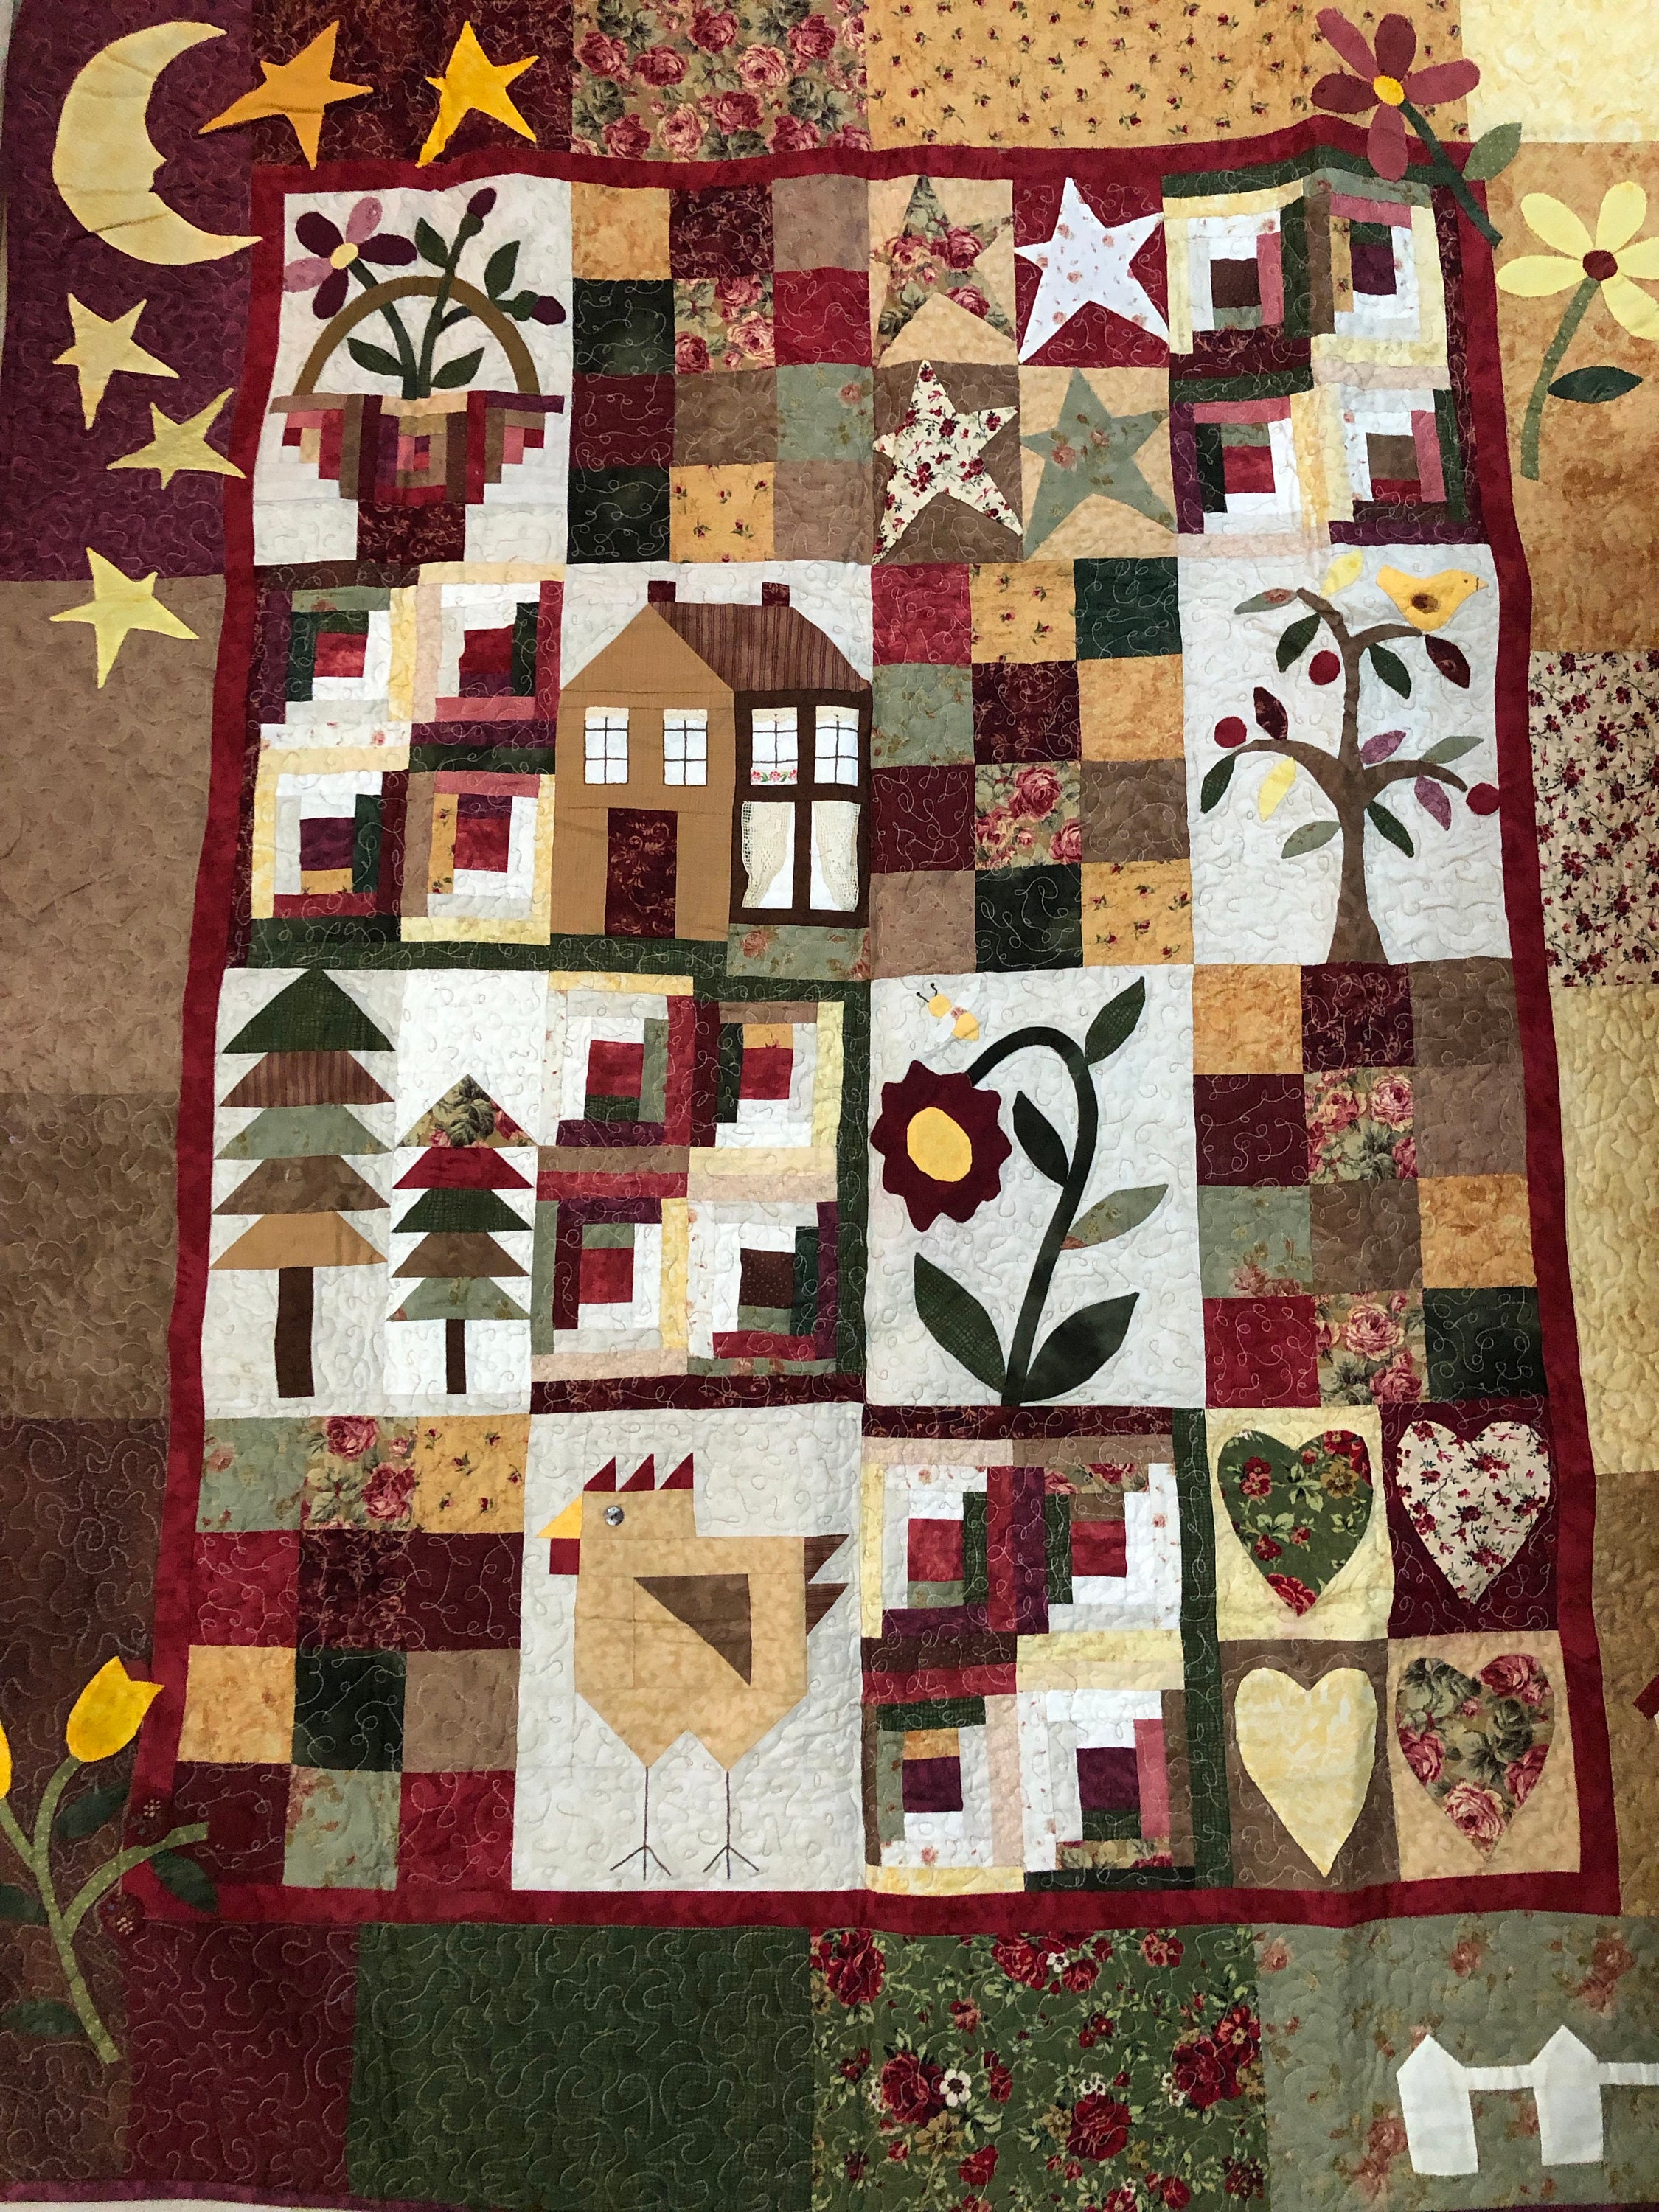 Quilts for Sale, Patchwork Quilt Handmade, Heirloom Quilt